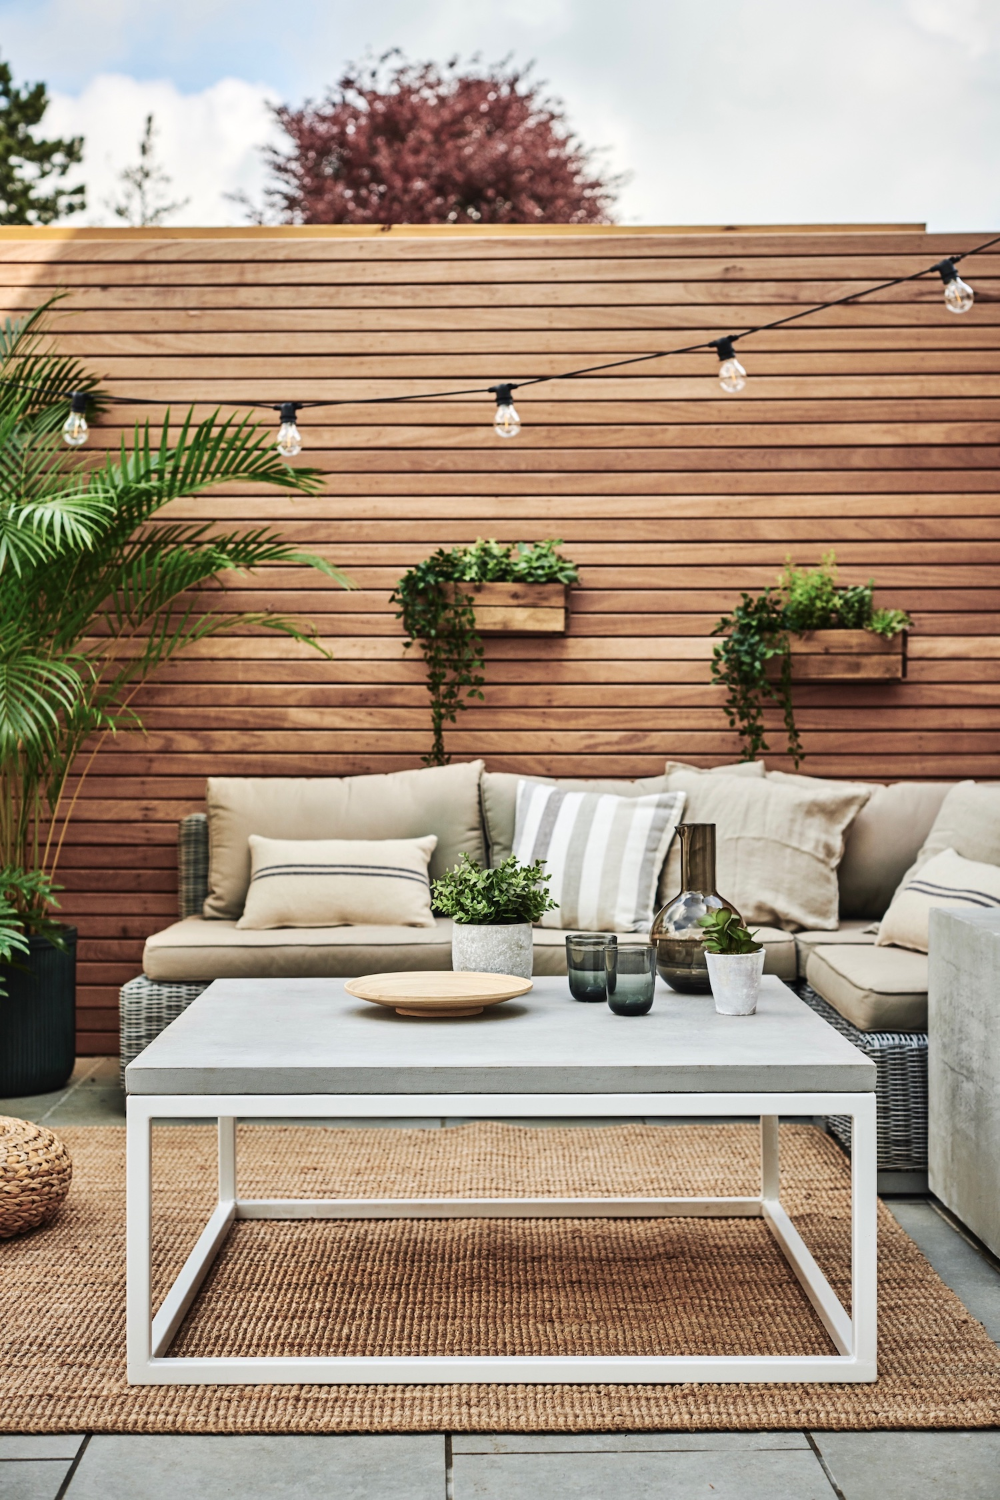 Creative Ways to Enhance Your Outdoor Space with Garden Decking